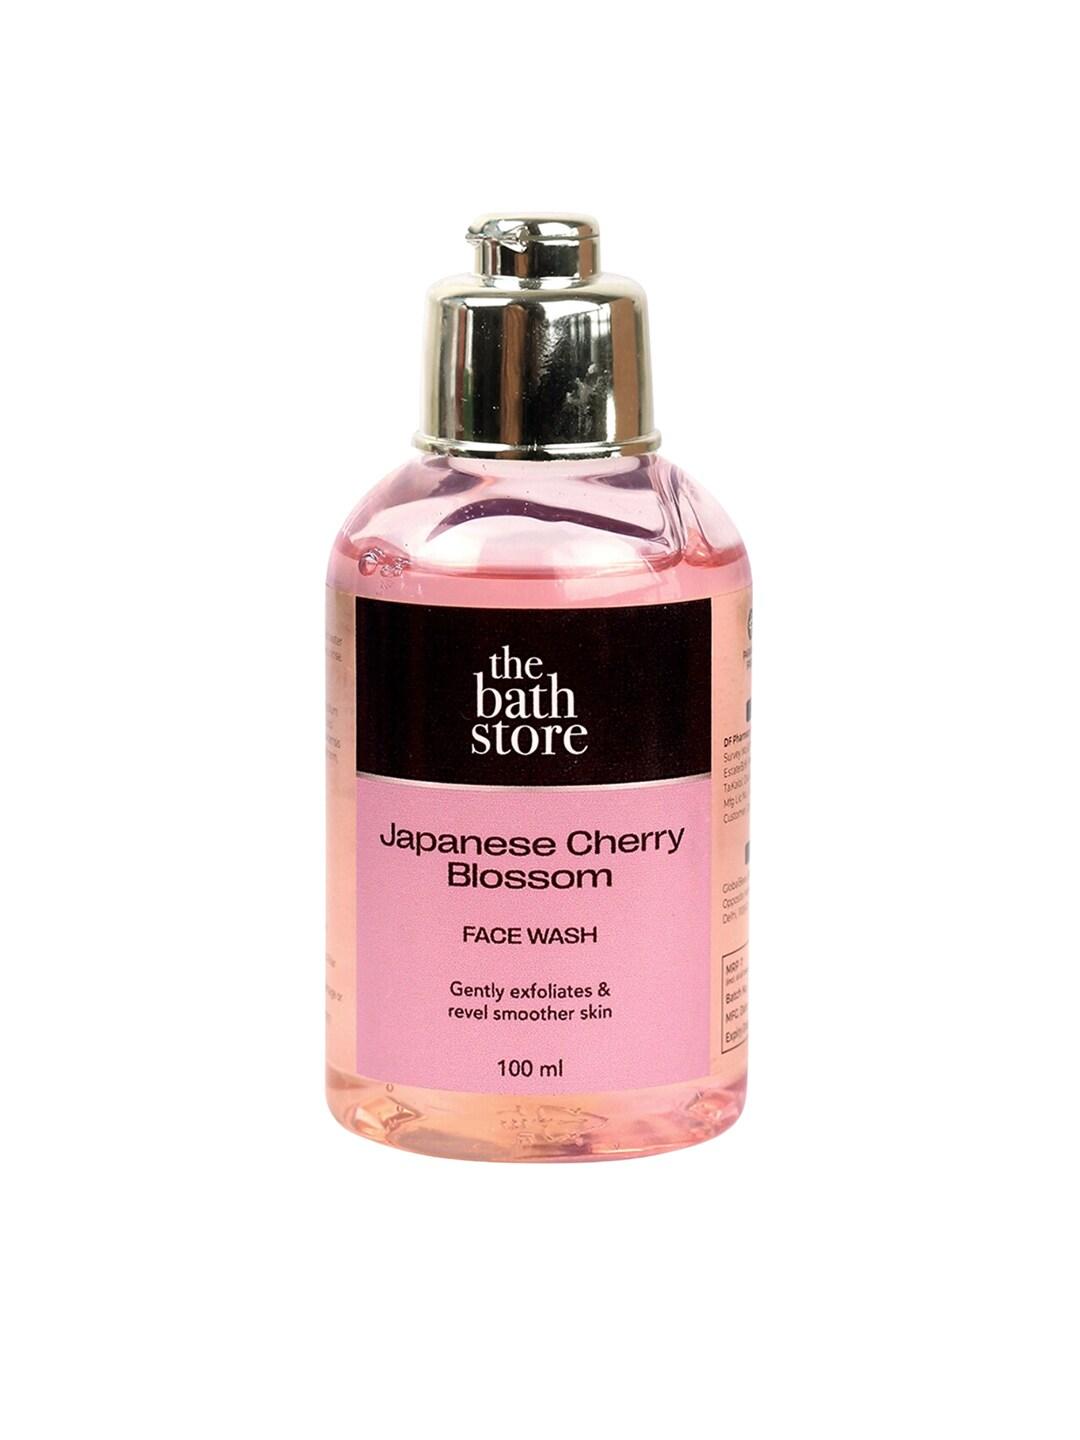 The Bath Store Japanese Cherry Blossom Face Wash to Gently Exfoliate - 100 ml